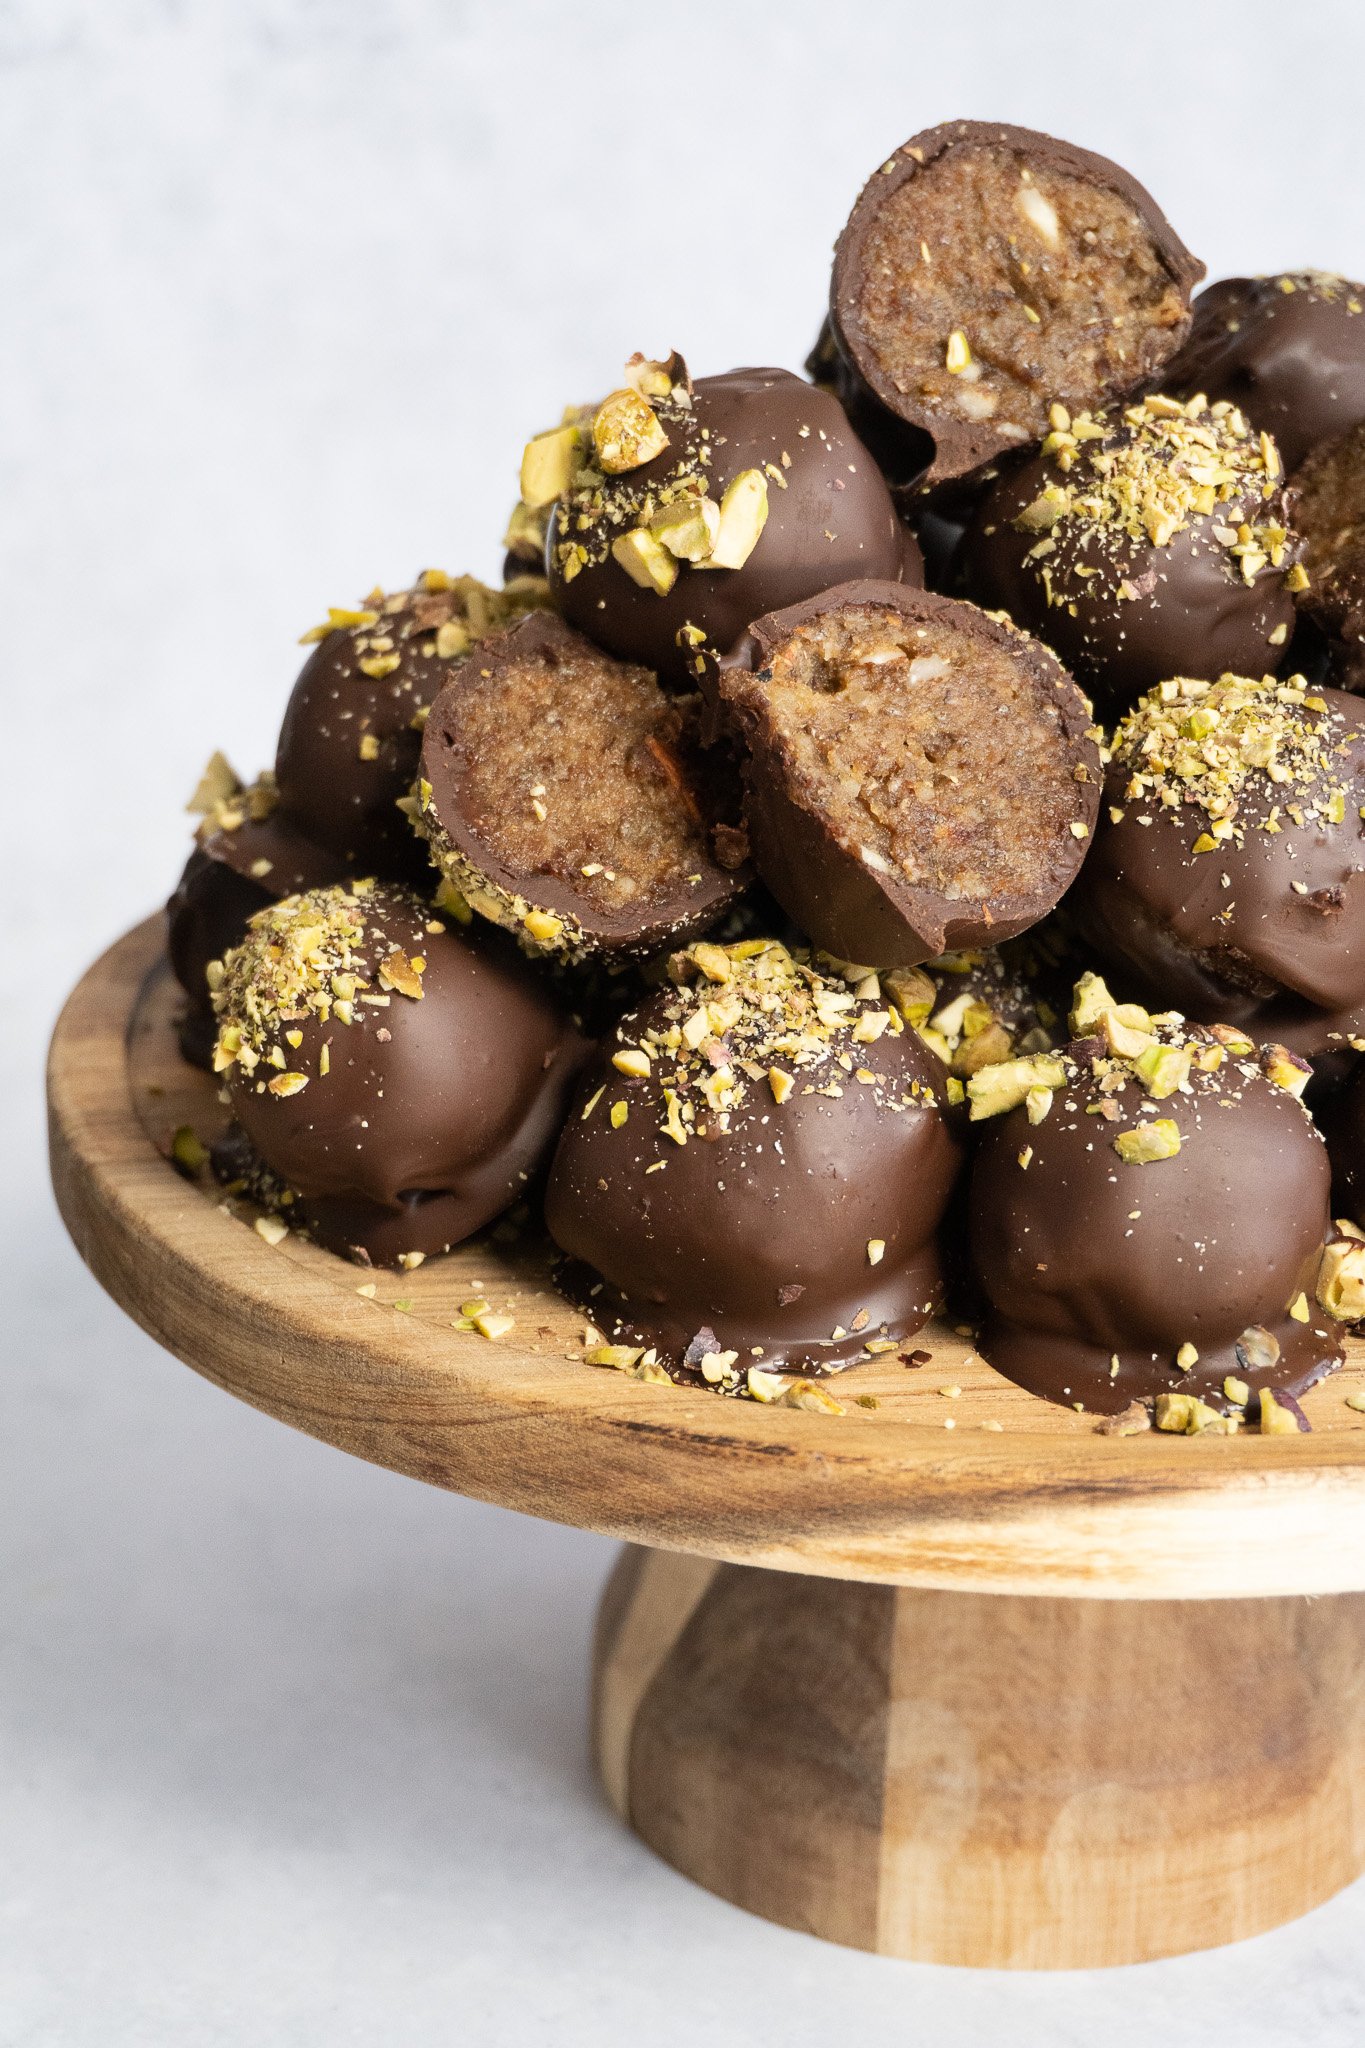 A close-up shot of healthy chocolate date truffle, revealing its chewy date and nut filling.